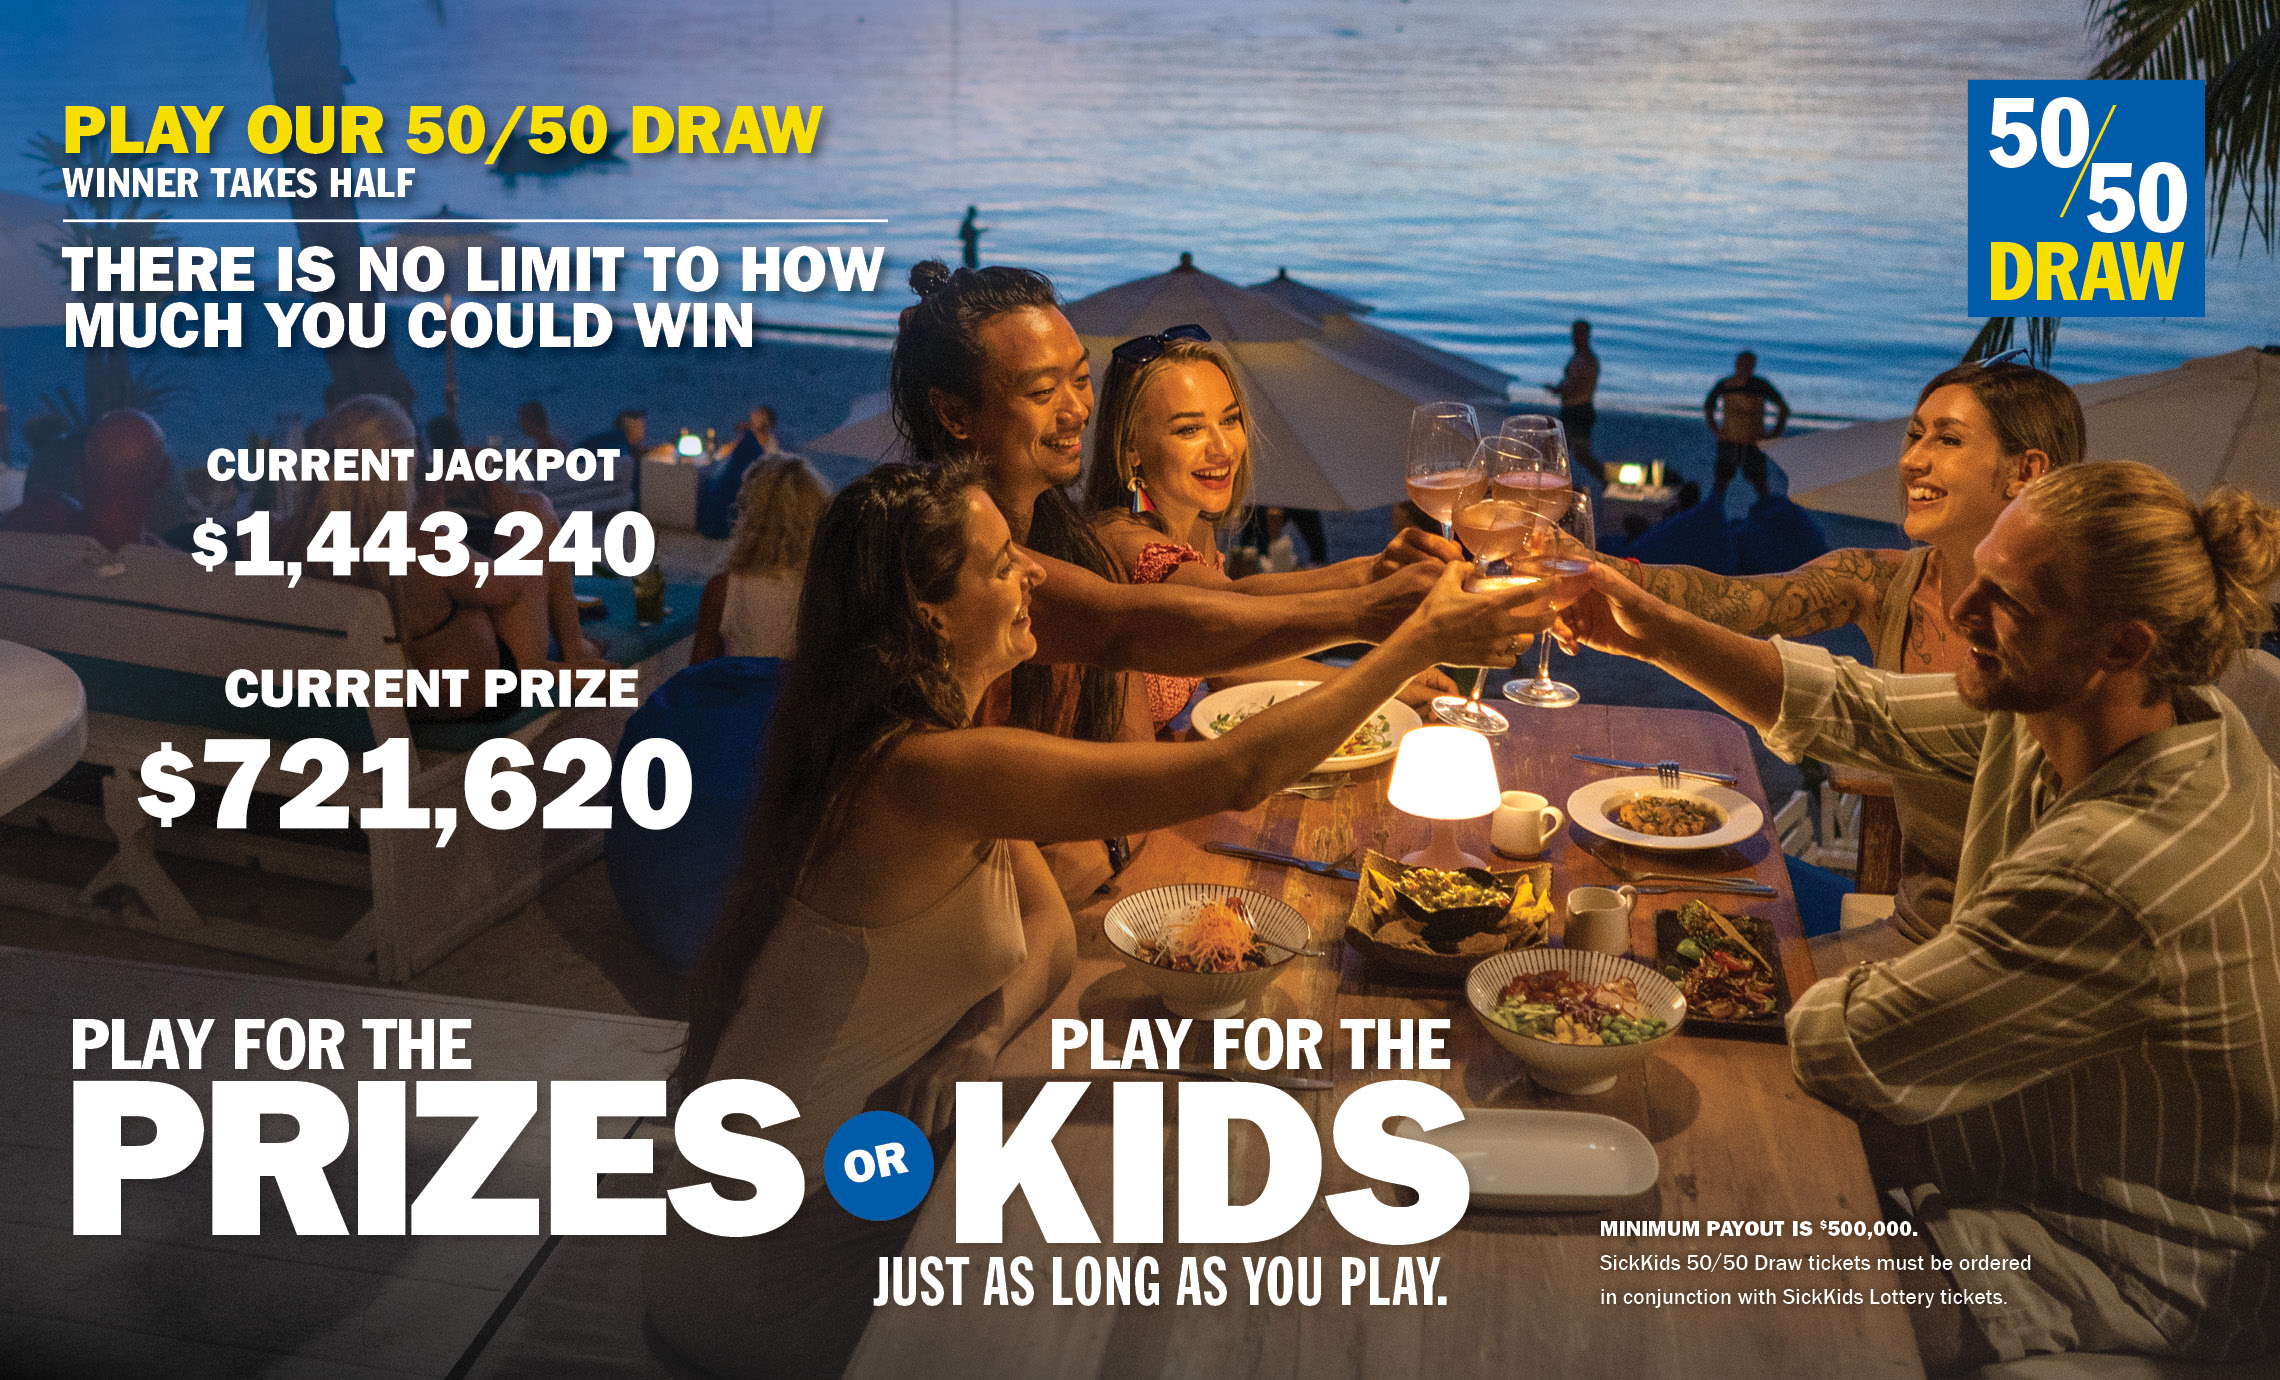 PLAY OUR 50/50 DRAW - THERE IS NO LIMIT TO HOW MUCH YOU COULD WIN